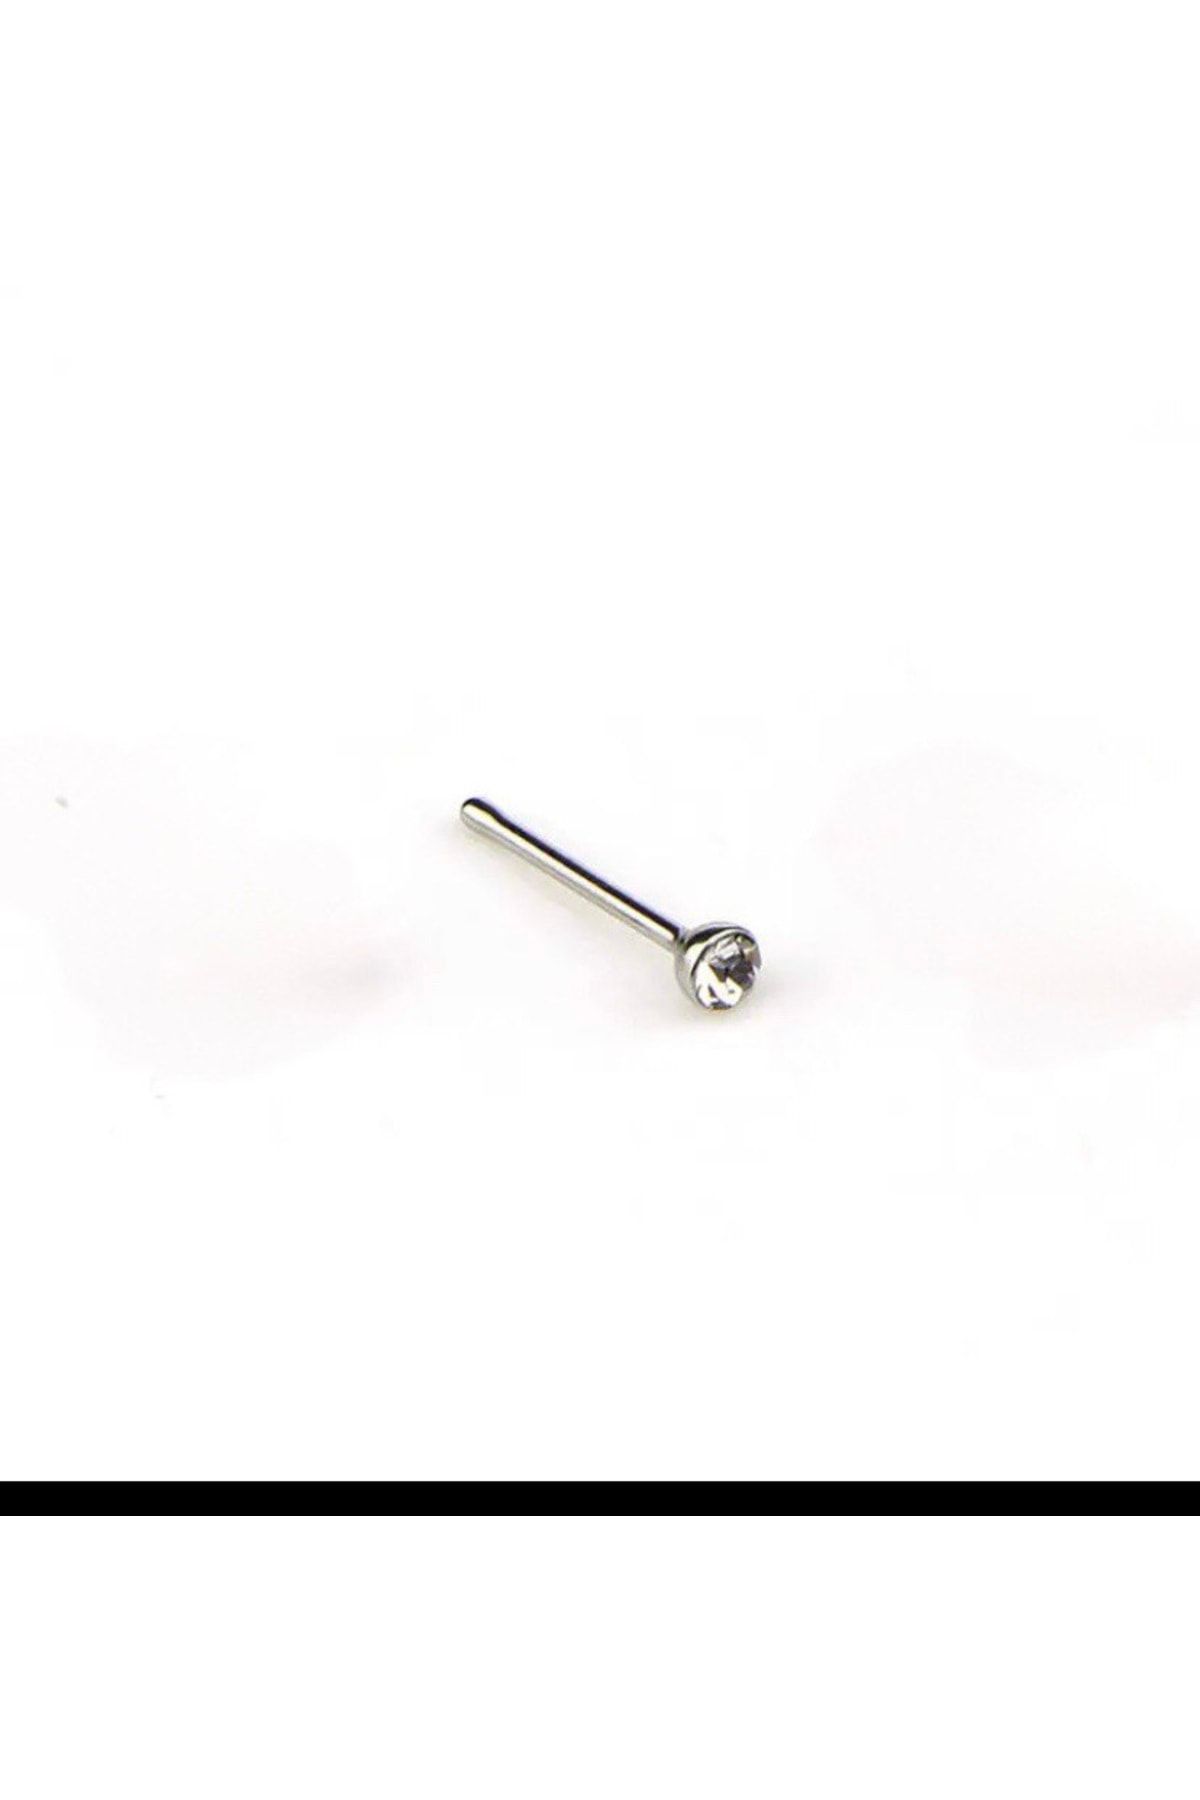 Buy Vrindam Exclusive 925 Sterling Silver Nose Pin (single Stone For Girls  And Women) _Comfortable Easy to Wear 3MM_SMALL SIZE at Amazon.in